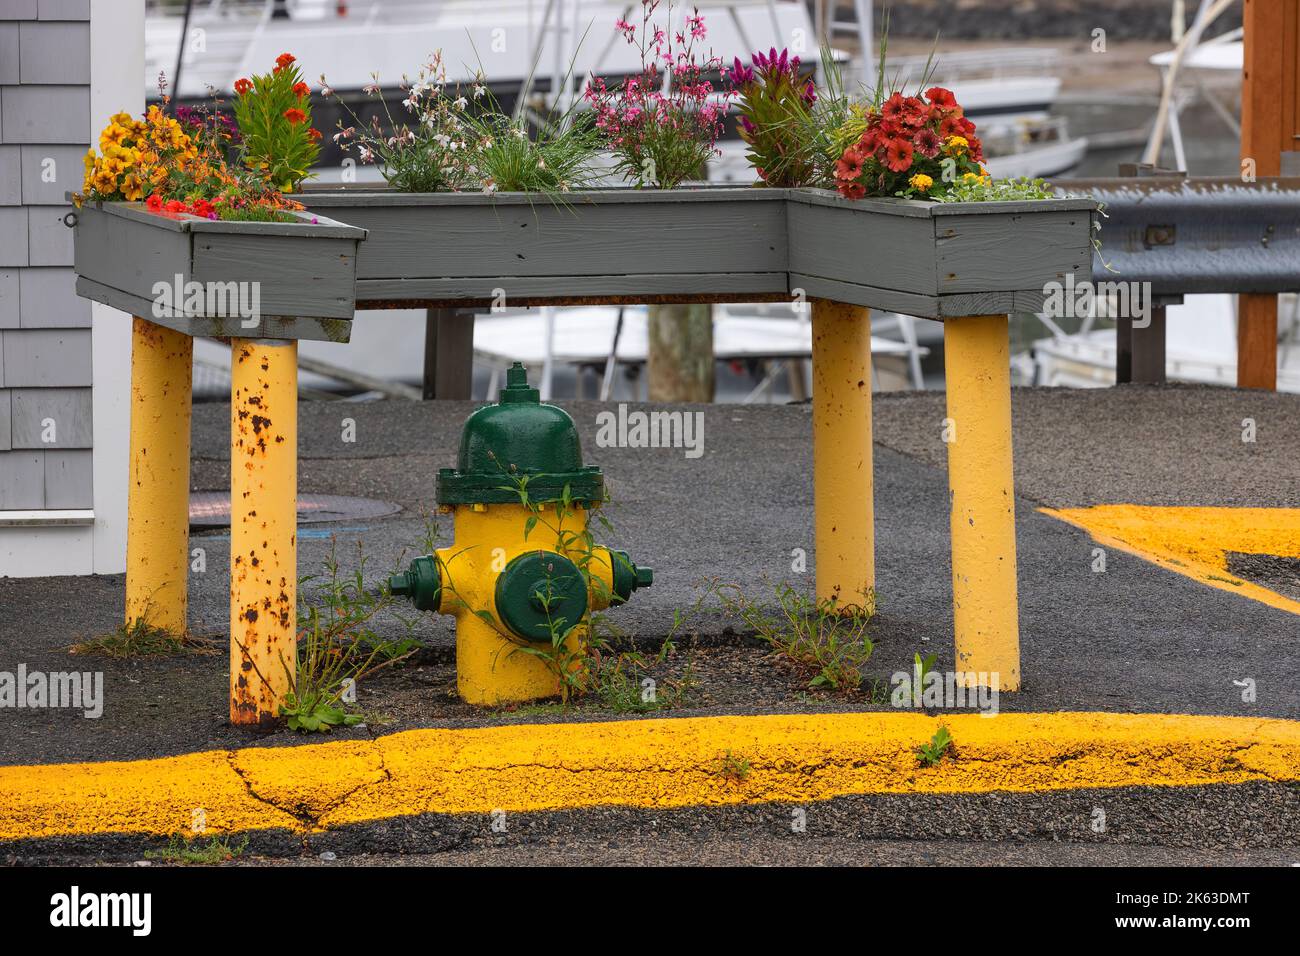 Firehydrant surrounded with flower boxes on steal poles. Stock Photo